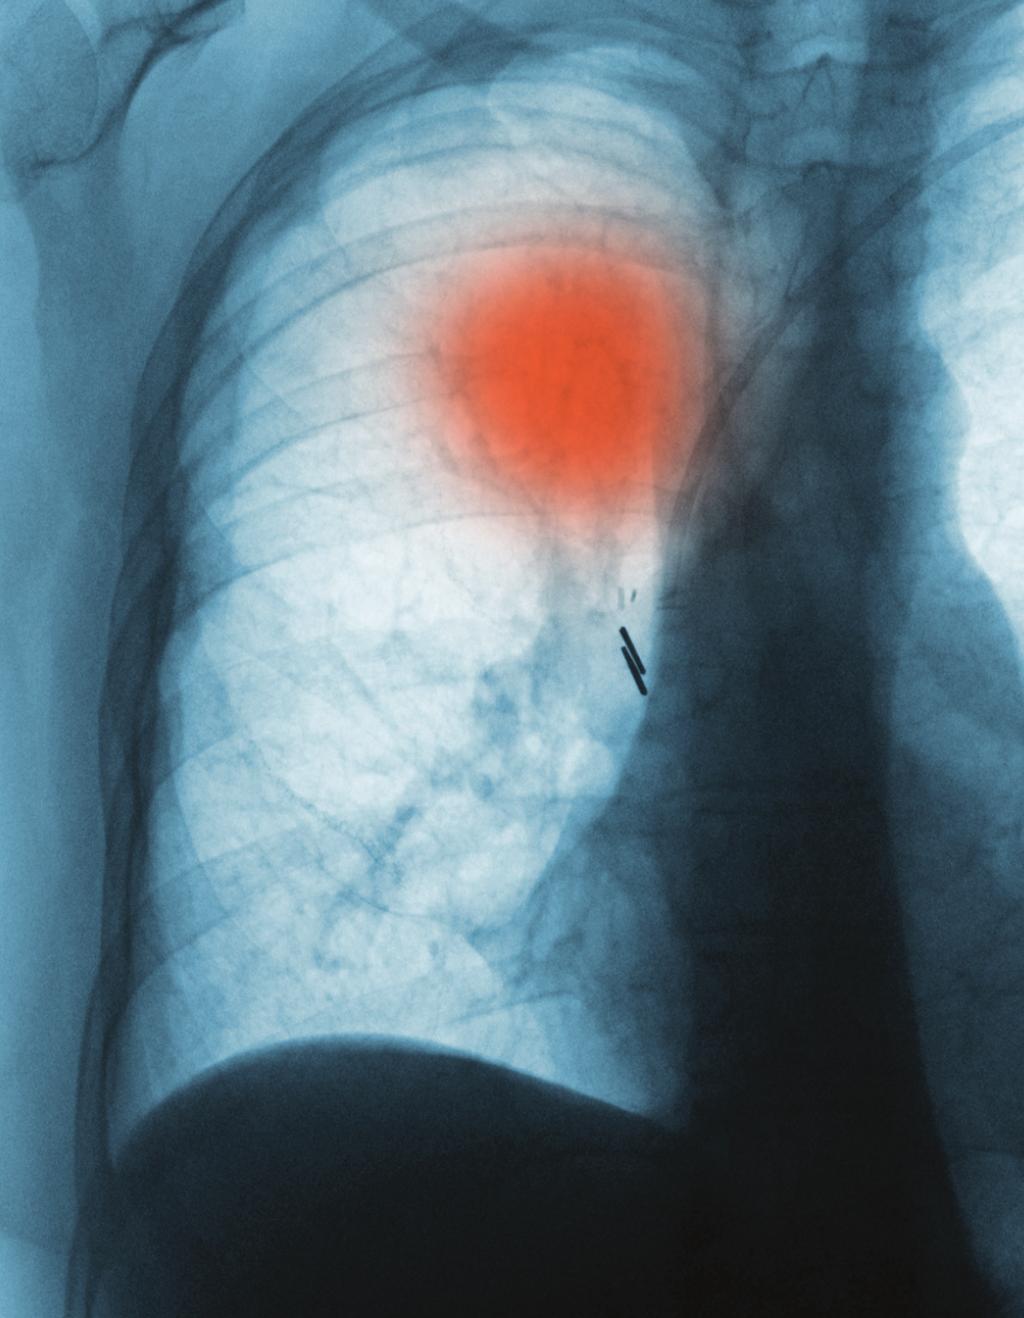 continuing education educational objectives After participating in this activity, clinicians should be better able to Perform diagnostic/molecular testing (EGFR, KRAS, EML4-ALK) for NSCLC according